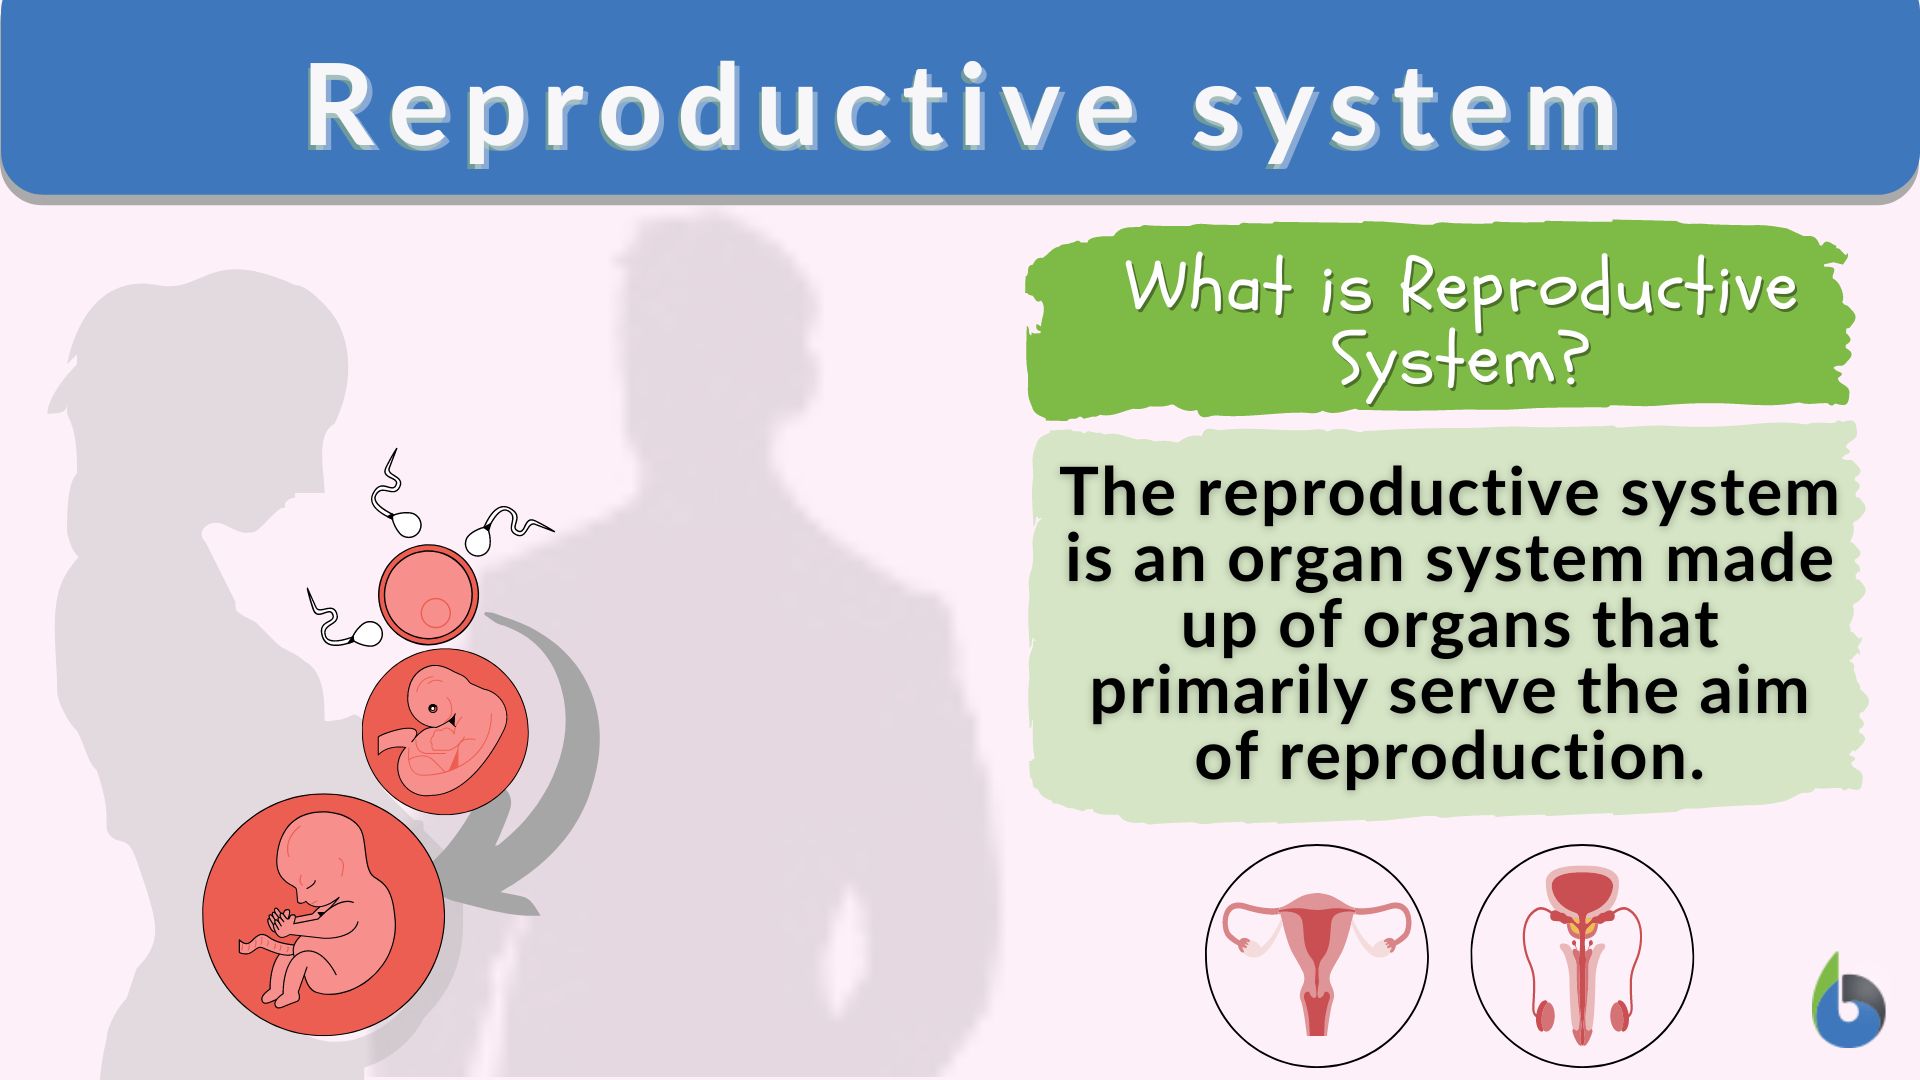 Reproductive system - Definition and Examples